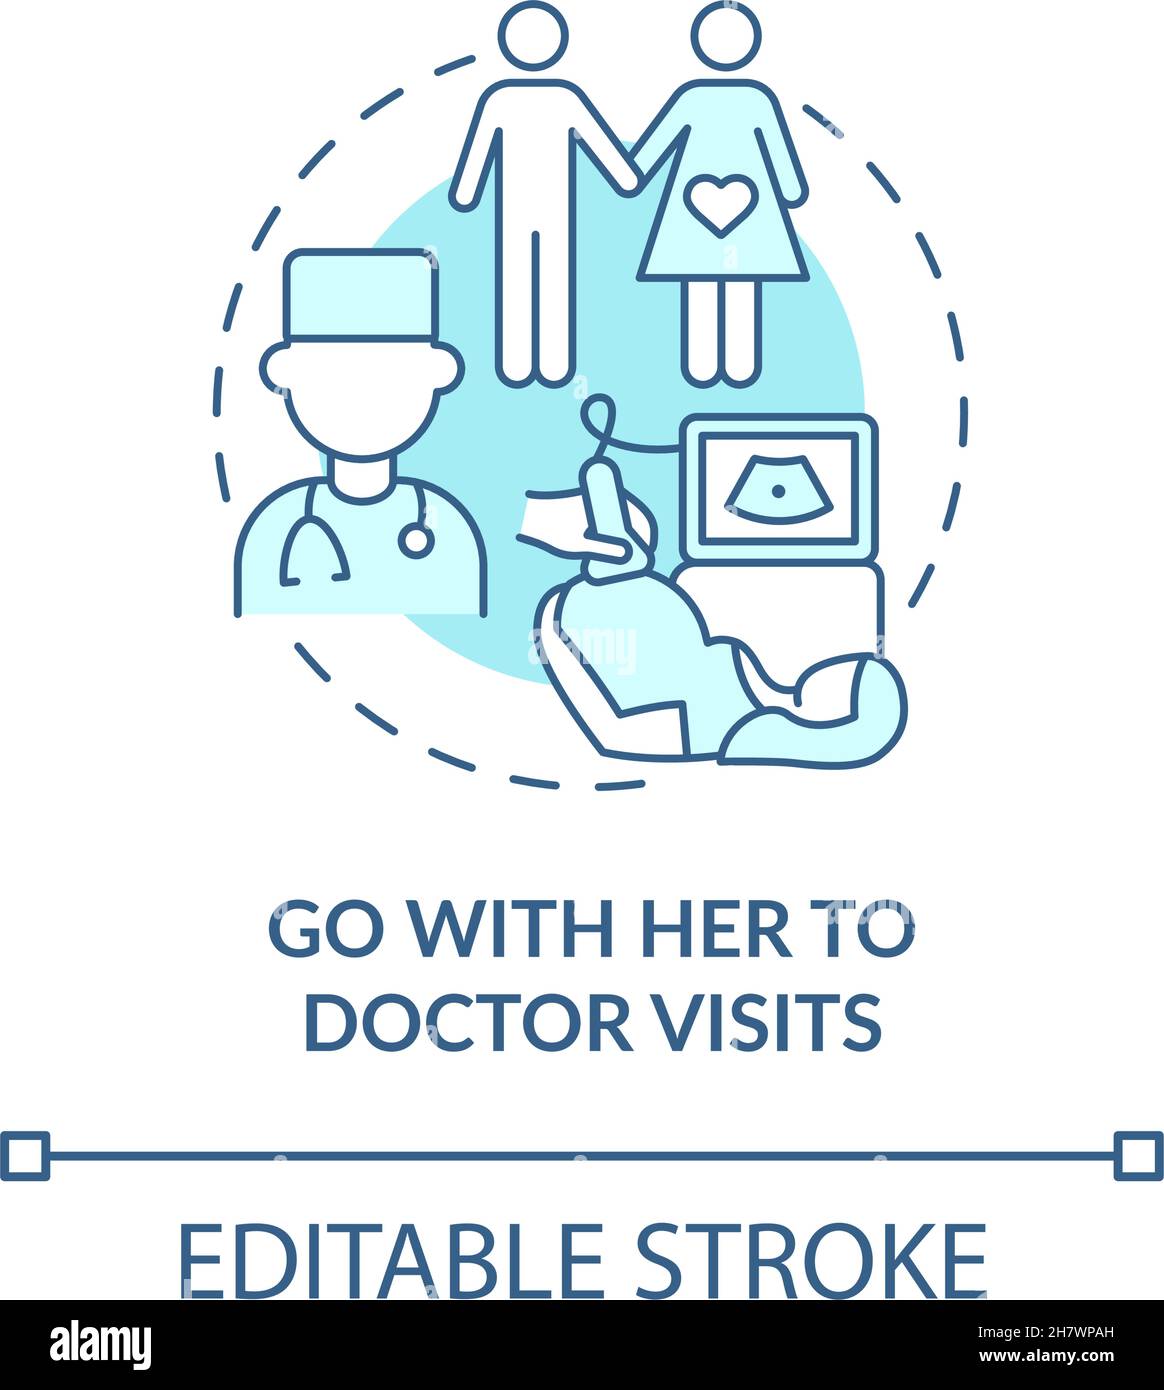 Go with her to doctor visits blue concept icon Stock Vector